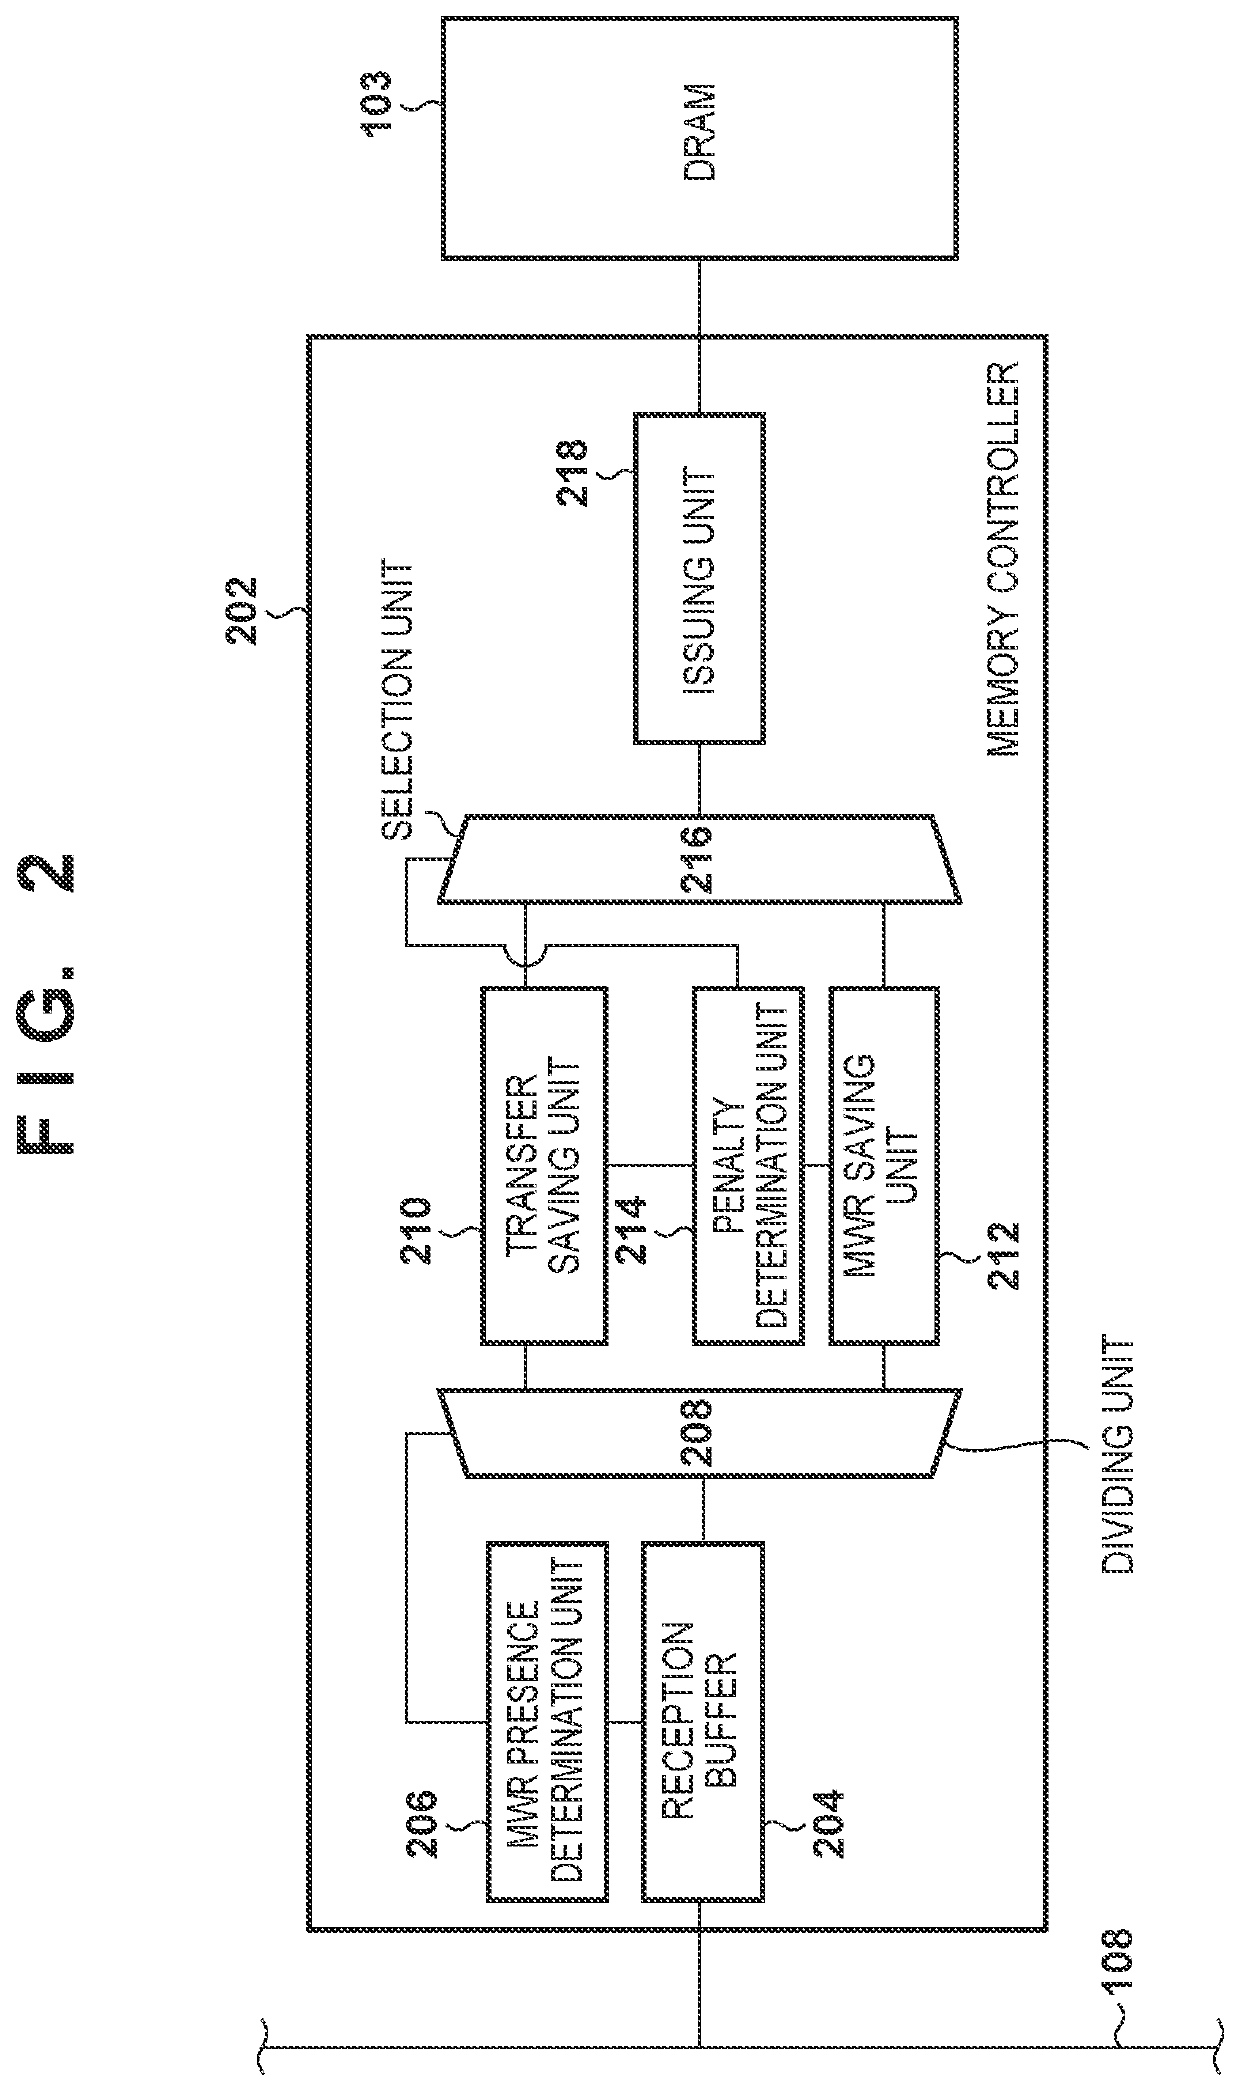 Memory controller and method performed by the memory controller